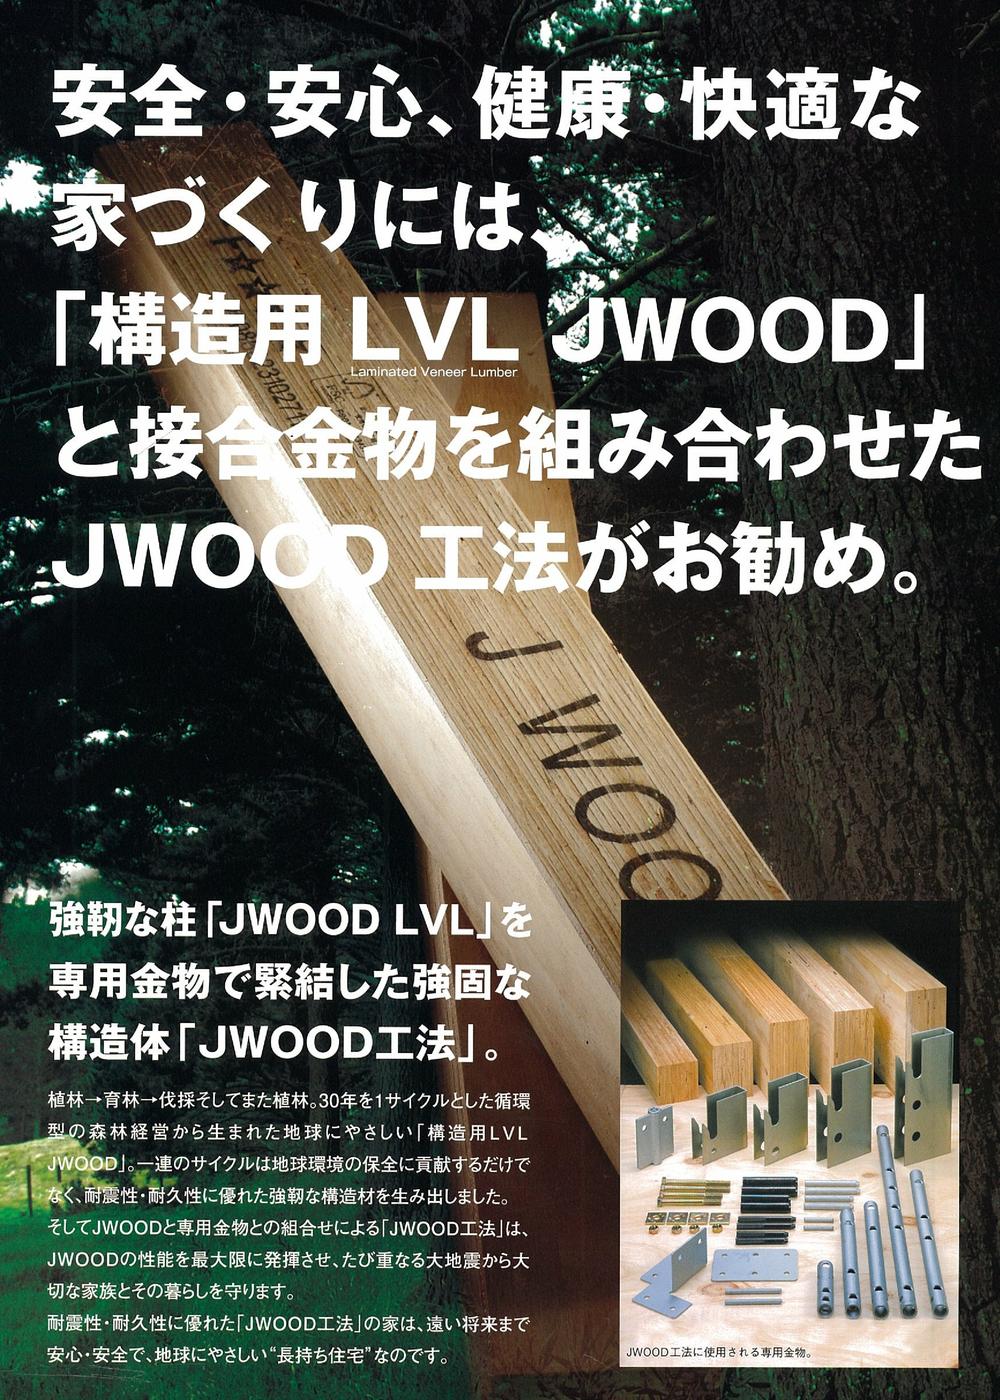 Construction ・ Construction method ・ specification. Wooden construction method JWOOD Using the LVL and dedicated hardware, Strong house in earthquake